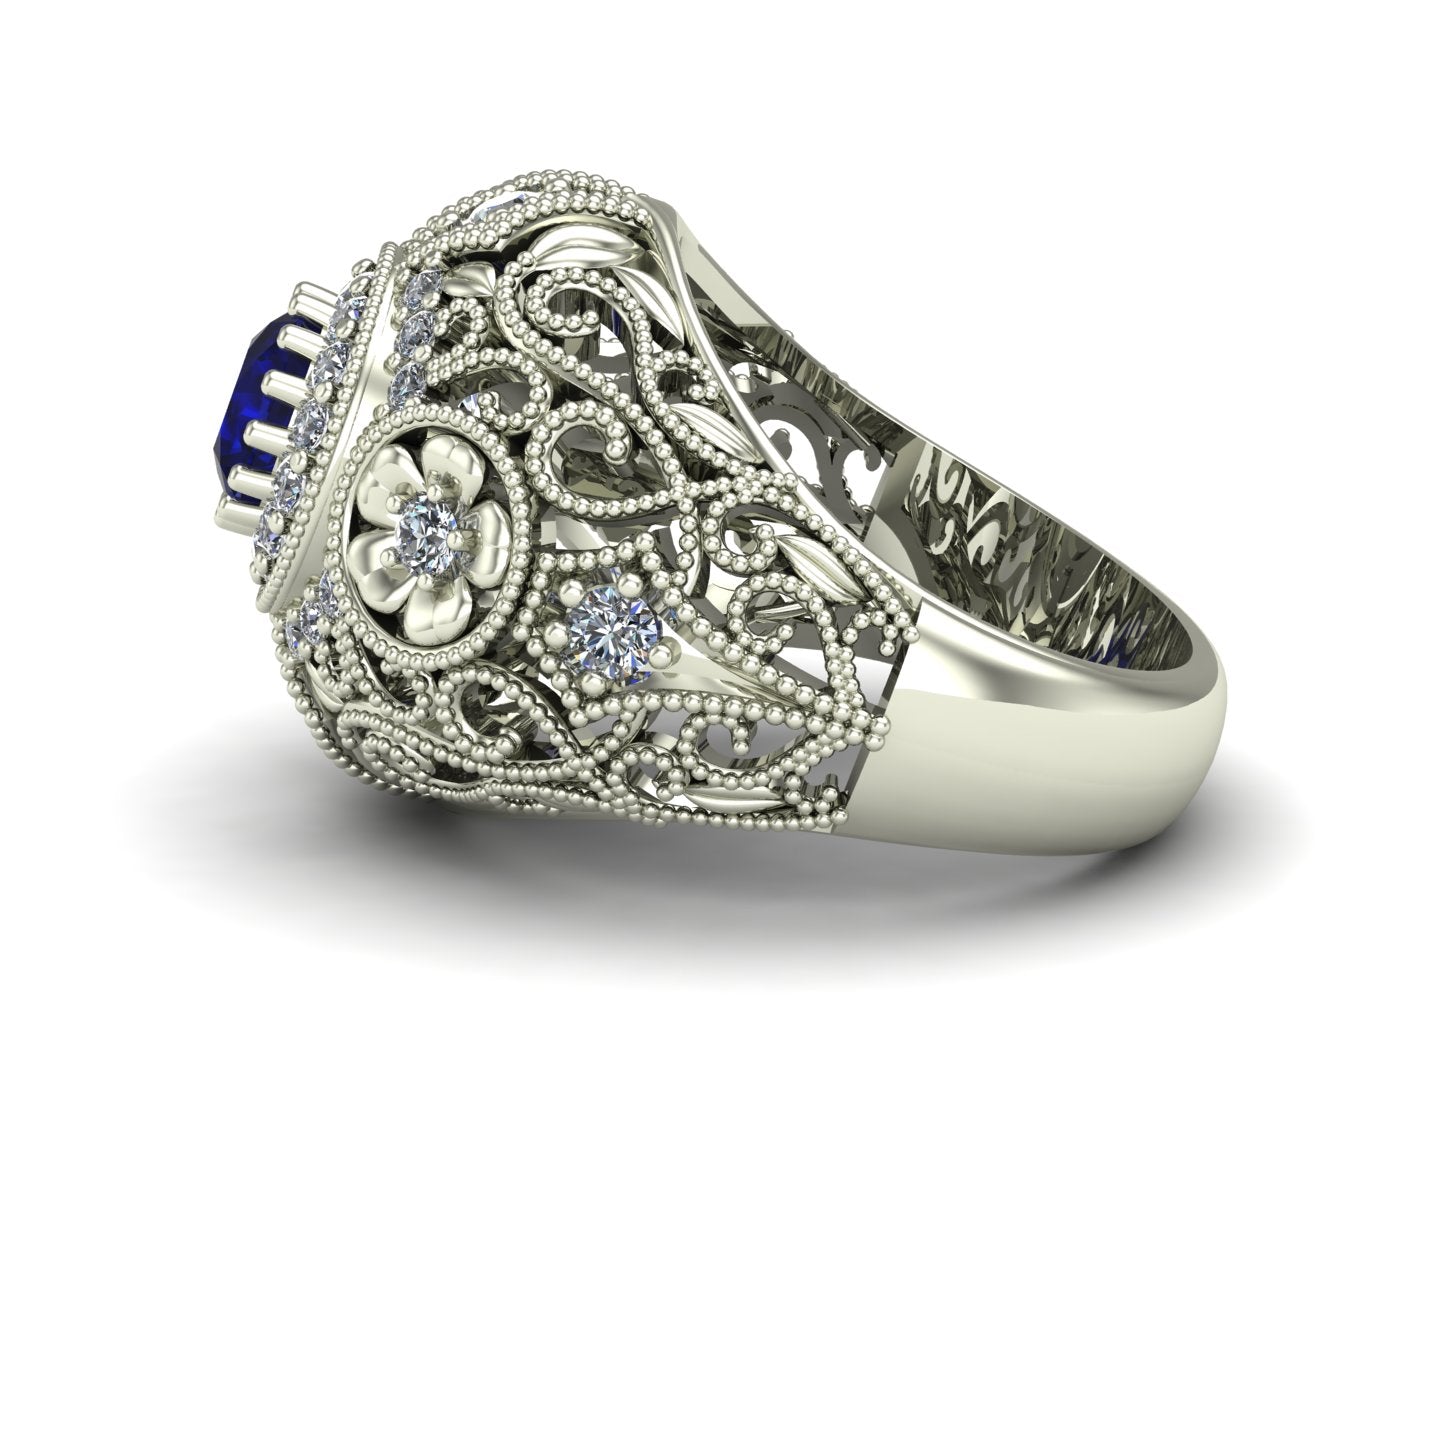 blue sapphire and diamond large dome cocktail ring in 14k white gold - Charles Babb Designs - side view